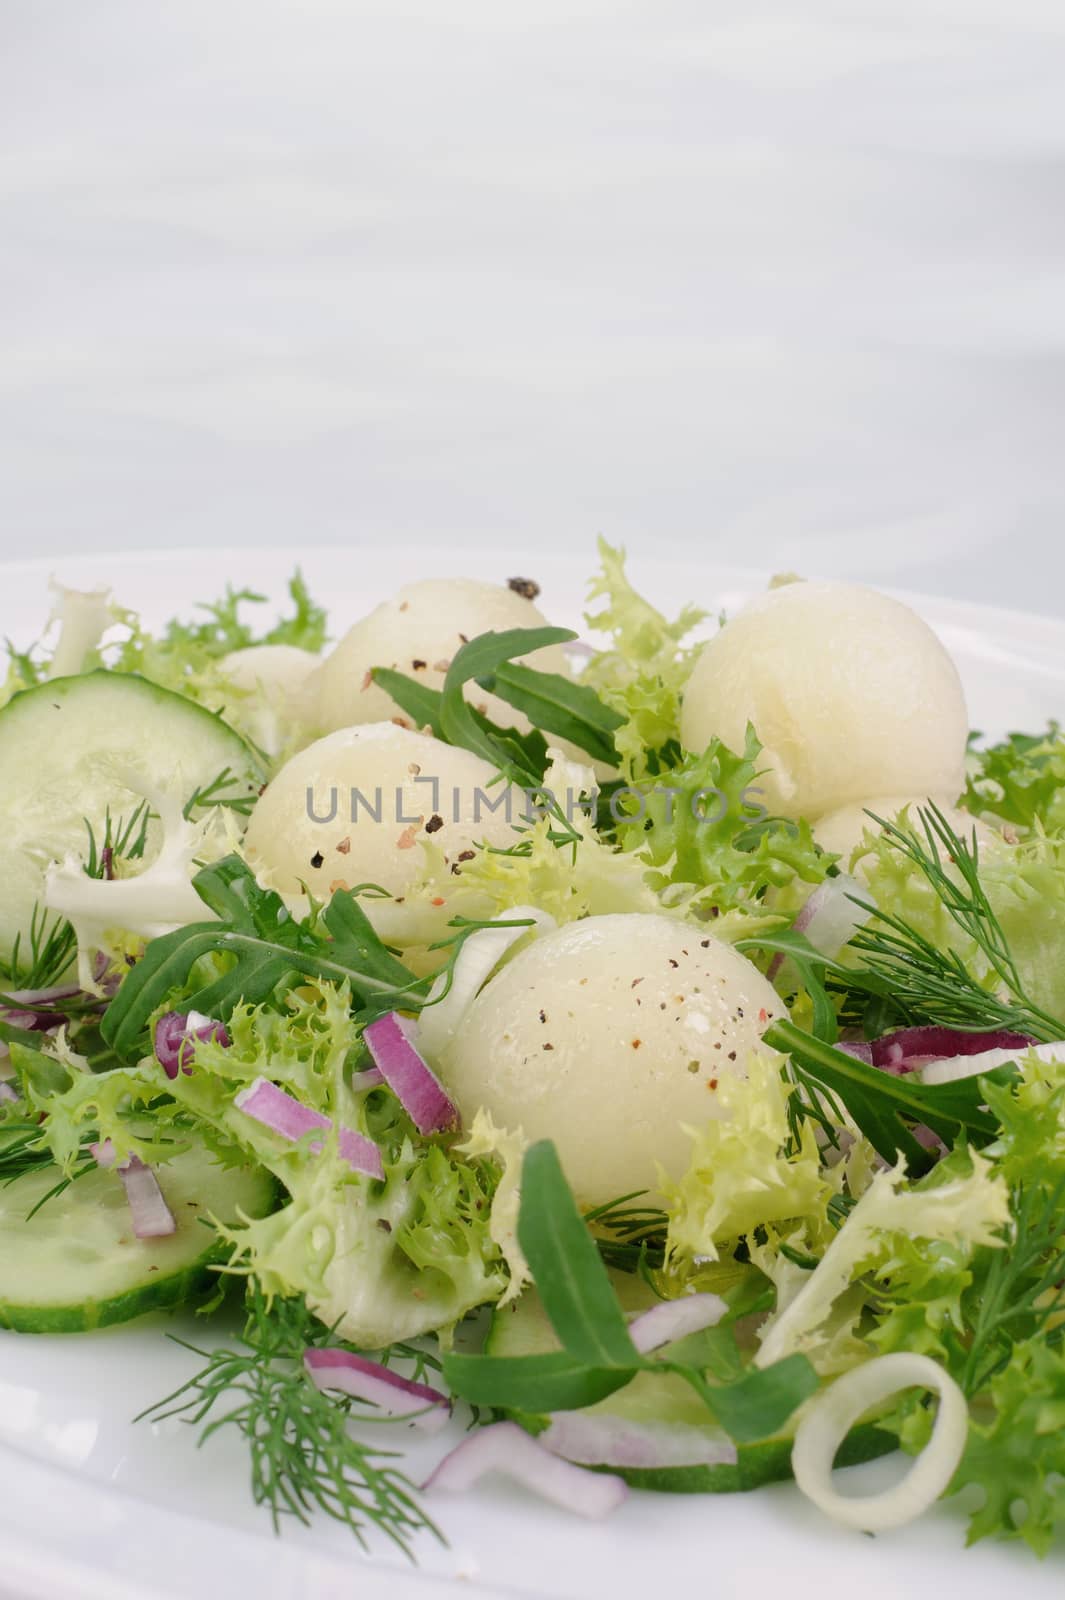 Melon salad with arugula and cucumber by Apolonia